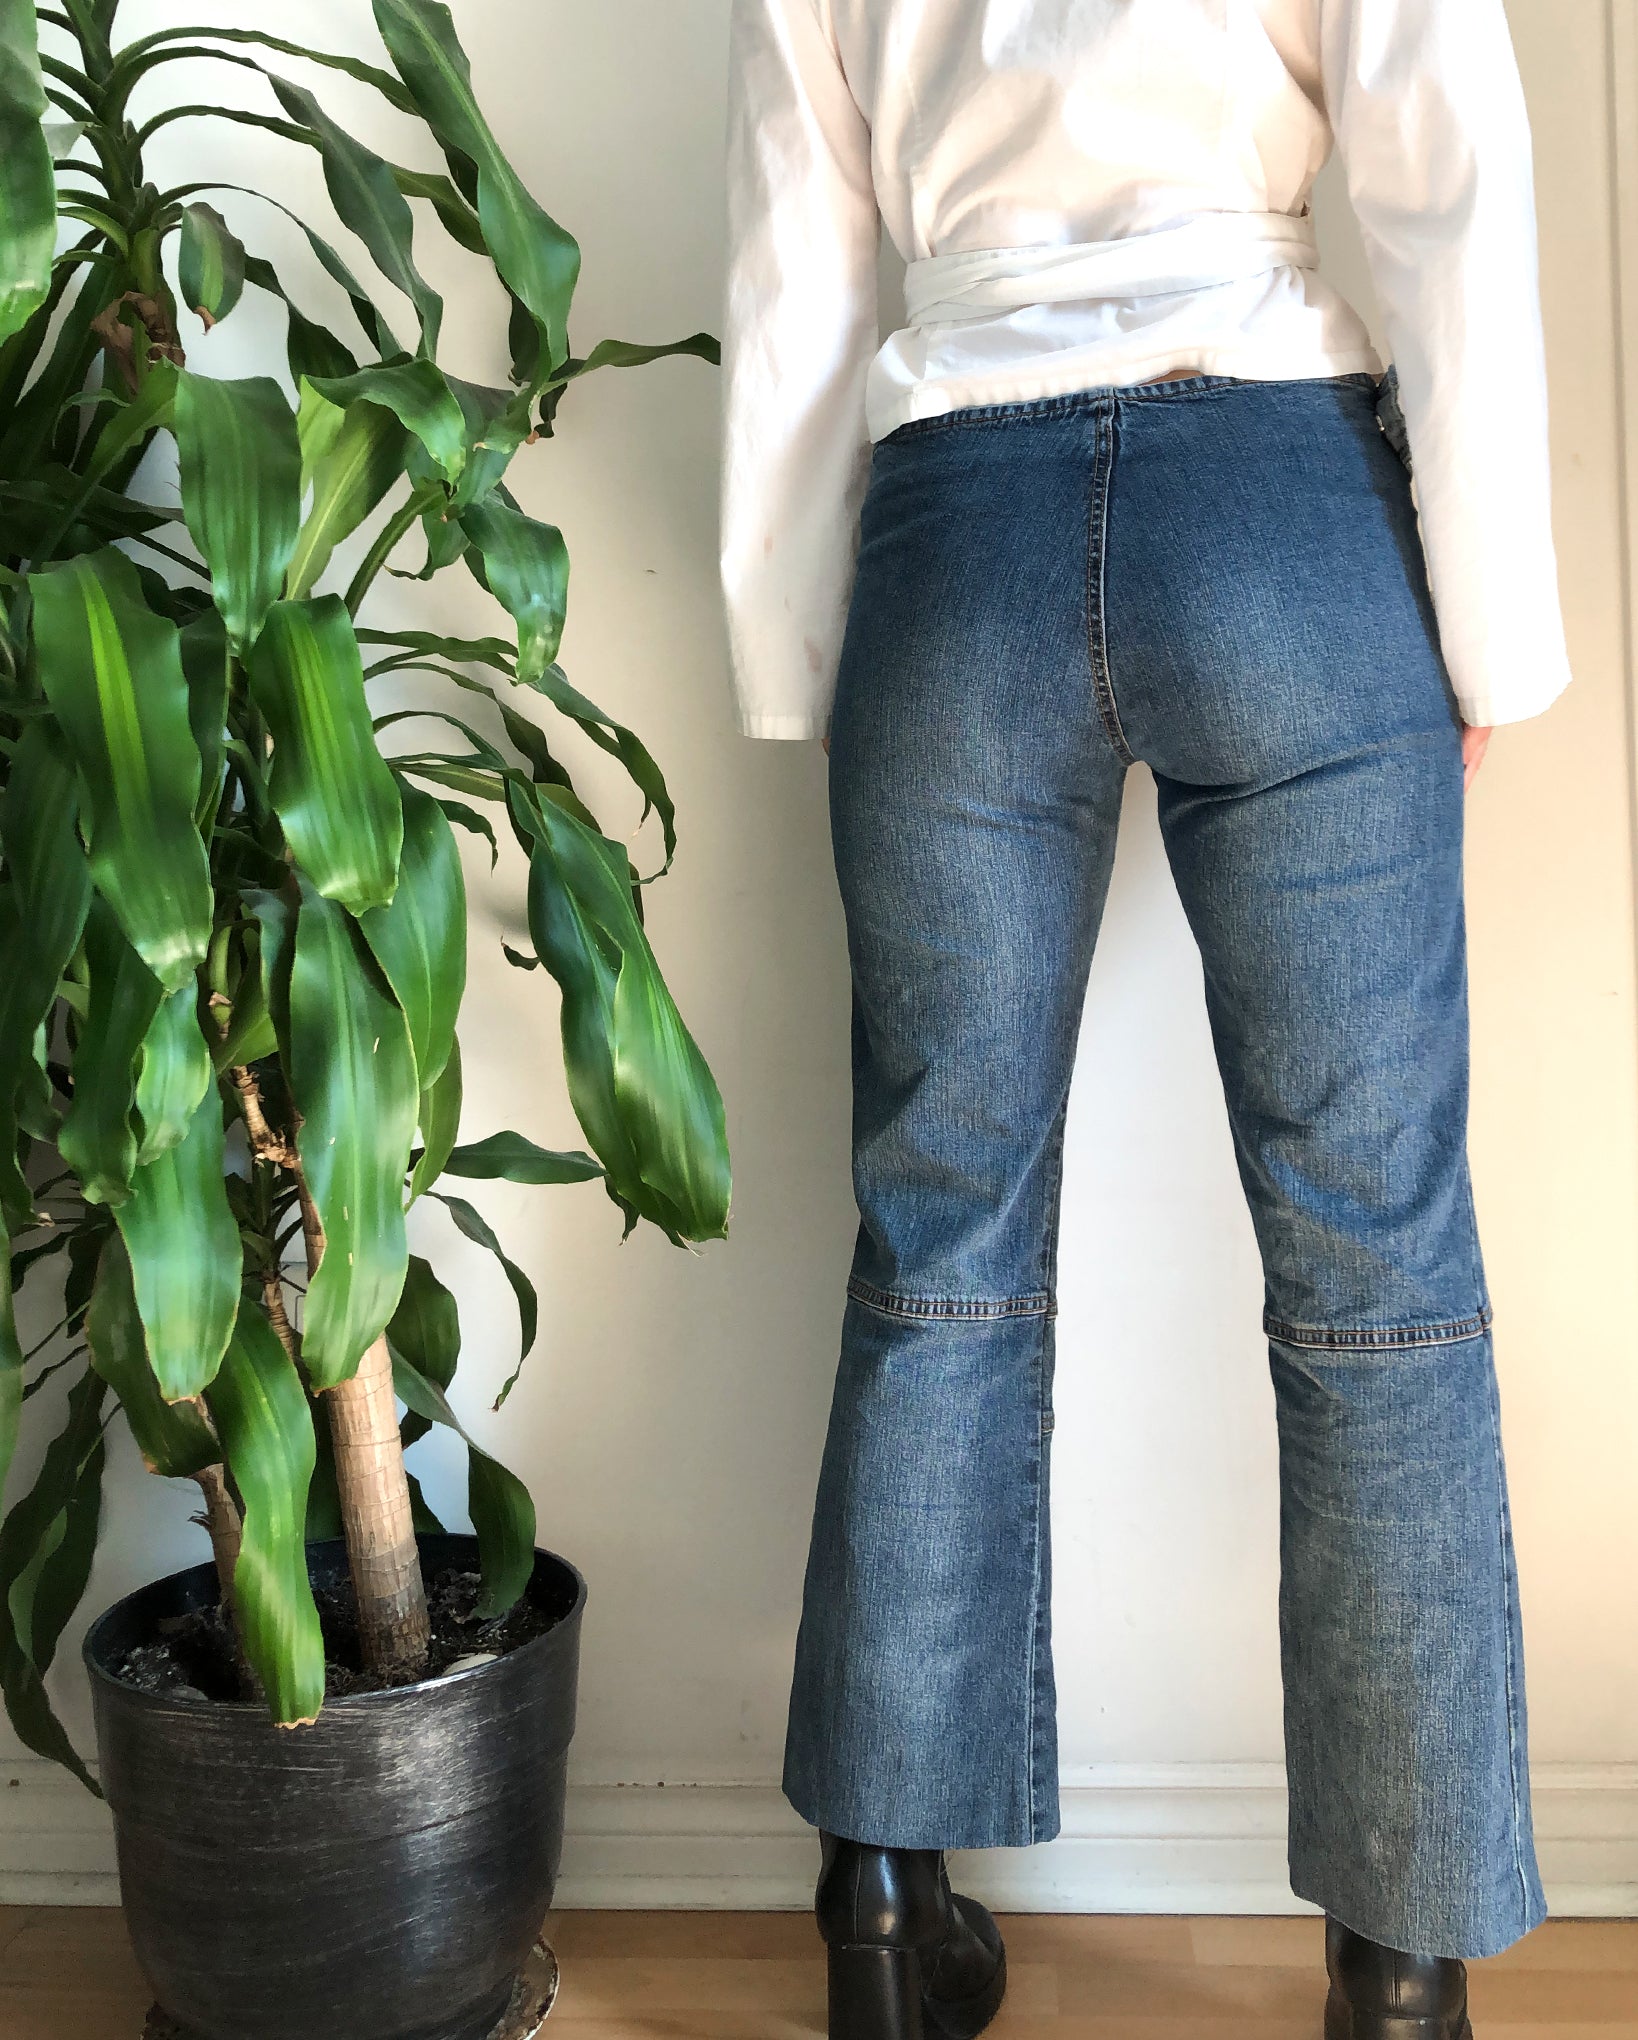 Y2K Low Rise Jeans With Flares and Contrast Denim Detail at Waist, Kokawaii Brand Jeans